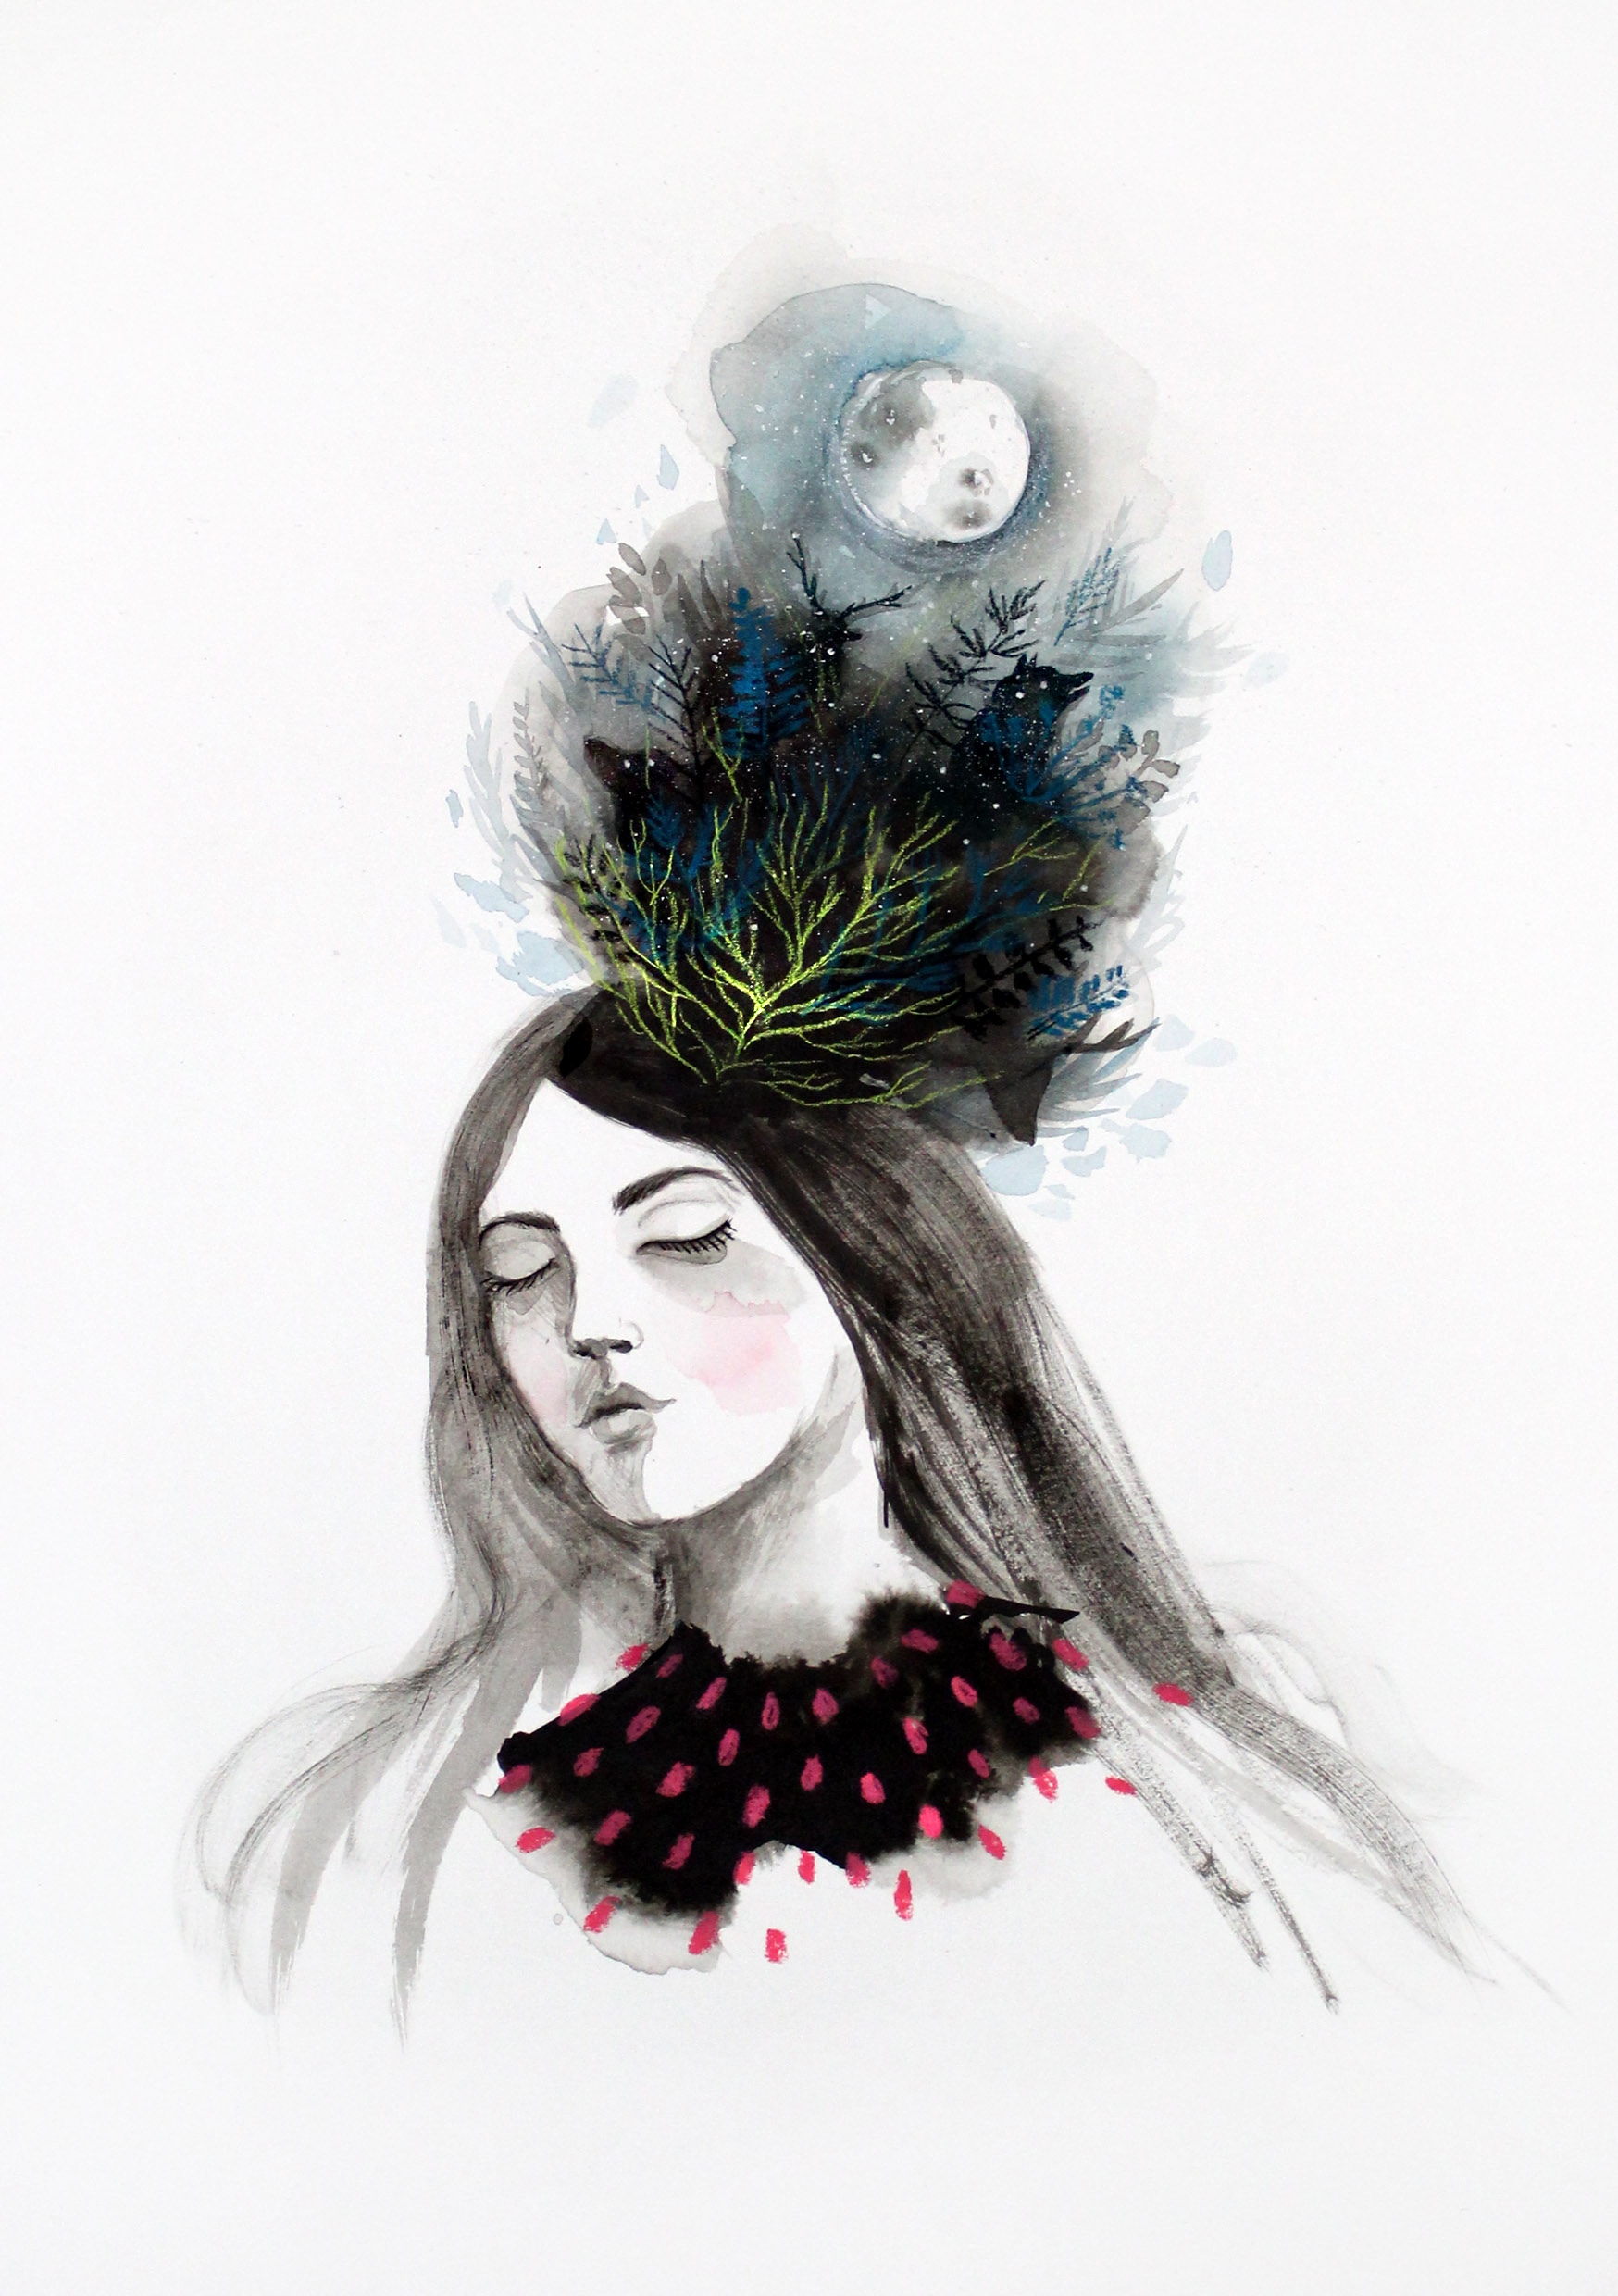 Daydream, dreaming, sleeping, dreams, escapism ink painting for Ghost Magazine